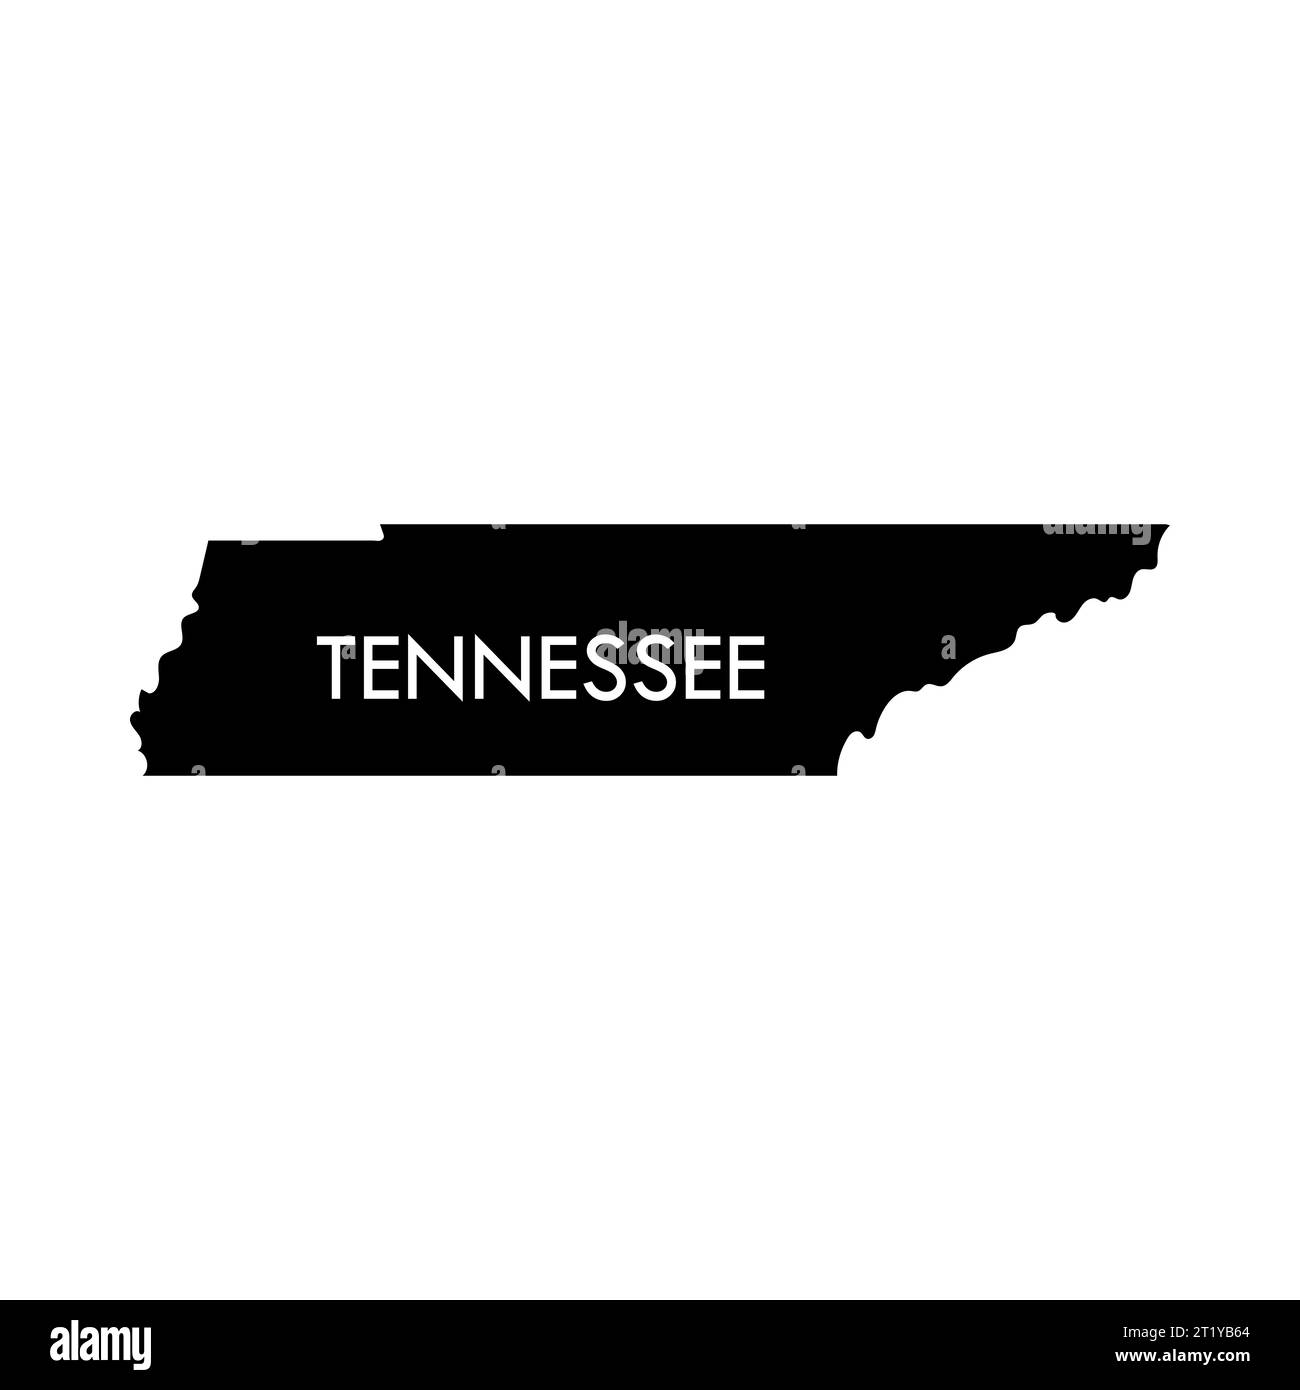 Tennessee a US state black element isolated on white background. United state of America. Map with county borders. Stock Vector